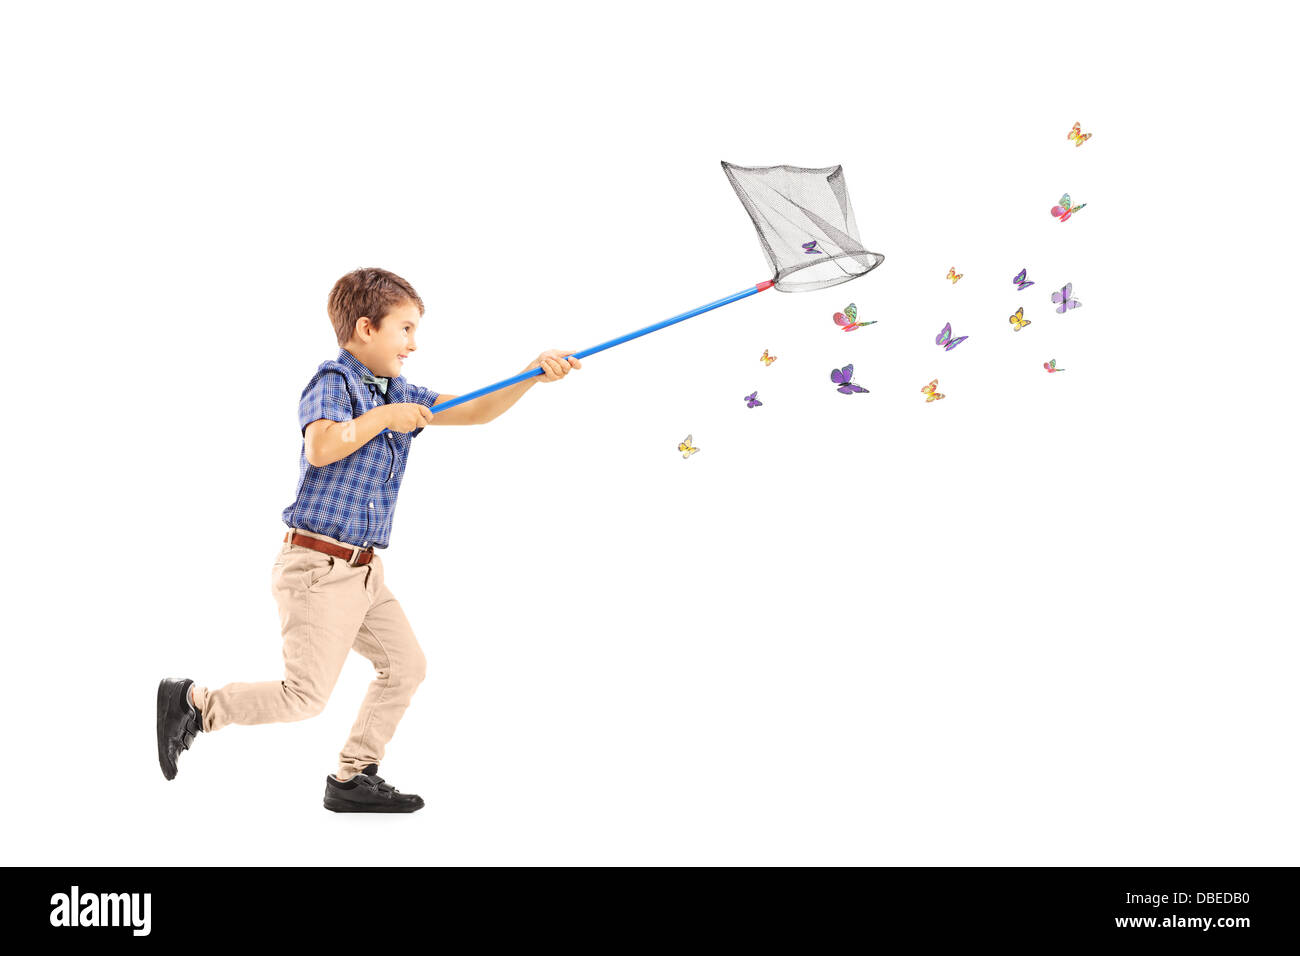 Full length portrait of a kid running and catching butterflies with net Stock Photo